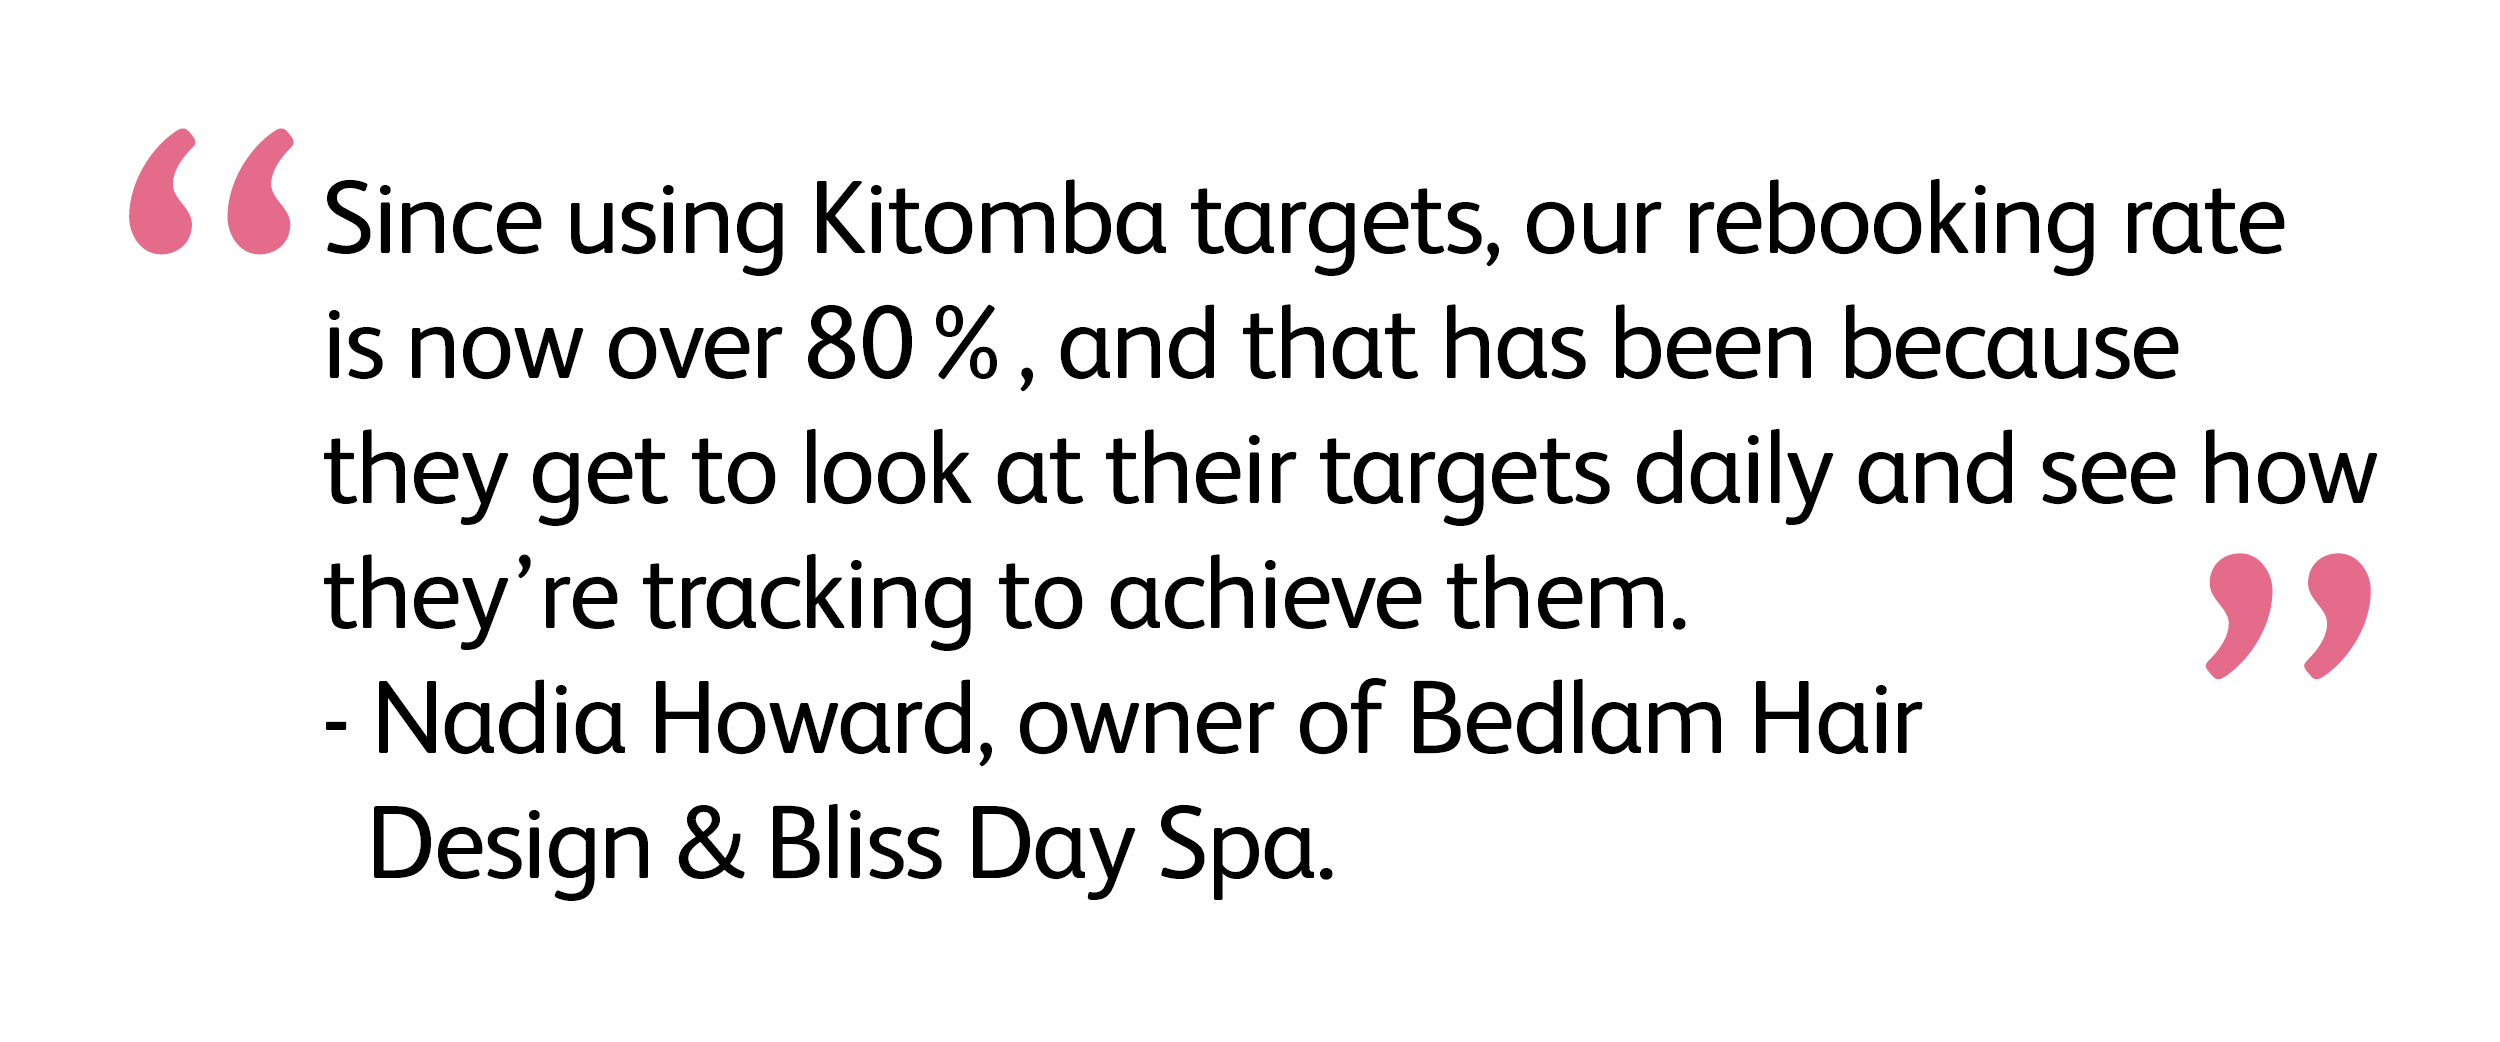 Since using Kitomba targets, our rebooking rate is now over 80%, and that has been because they get to look at their targets daily and see how they’re tracking to achieve them.